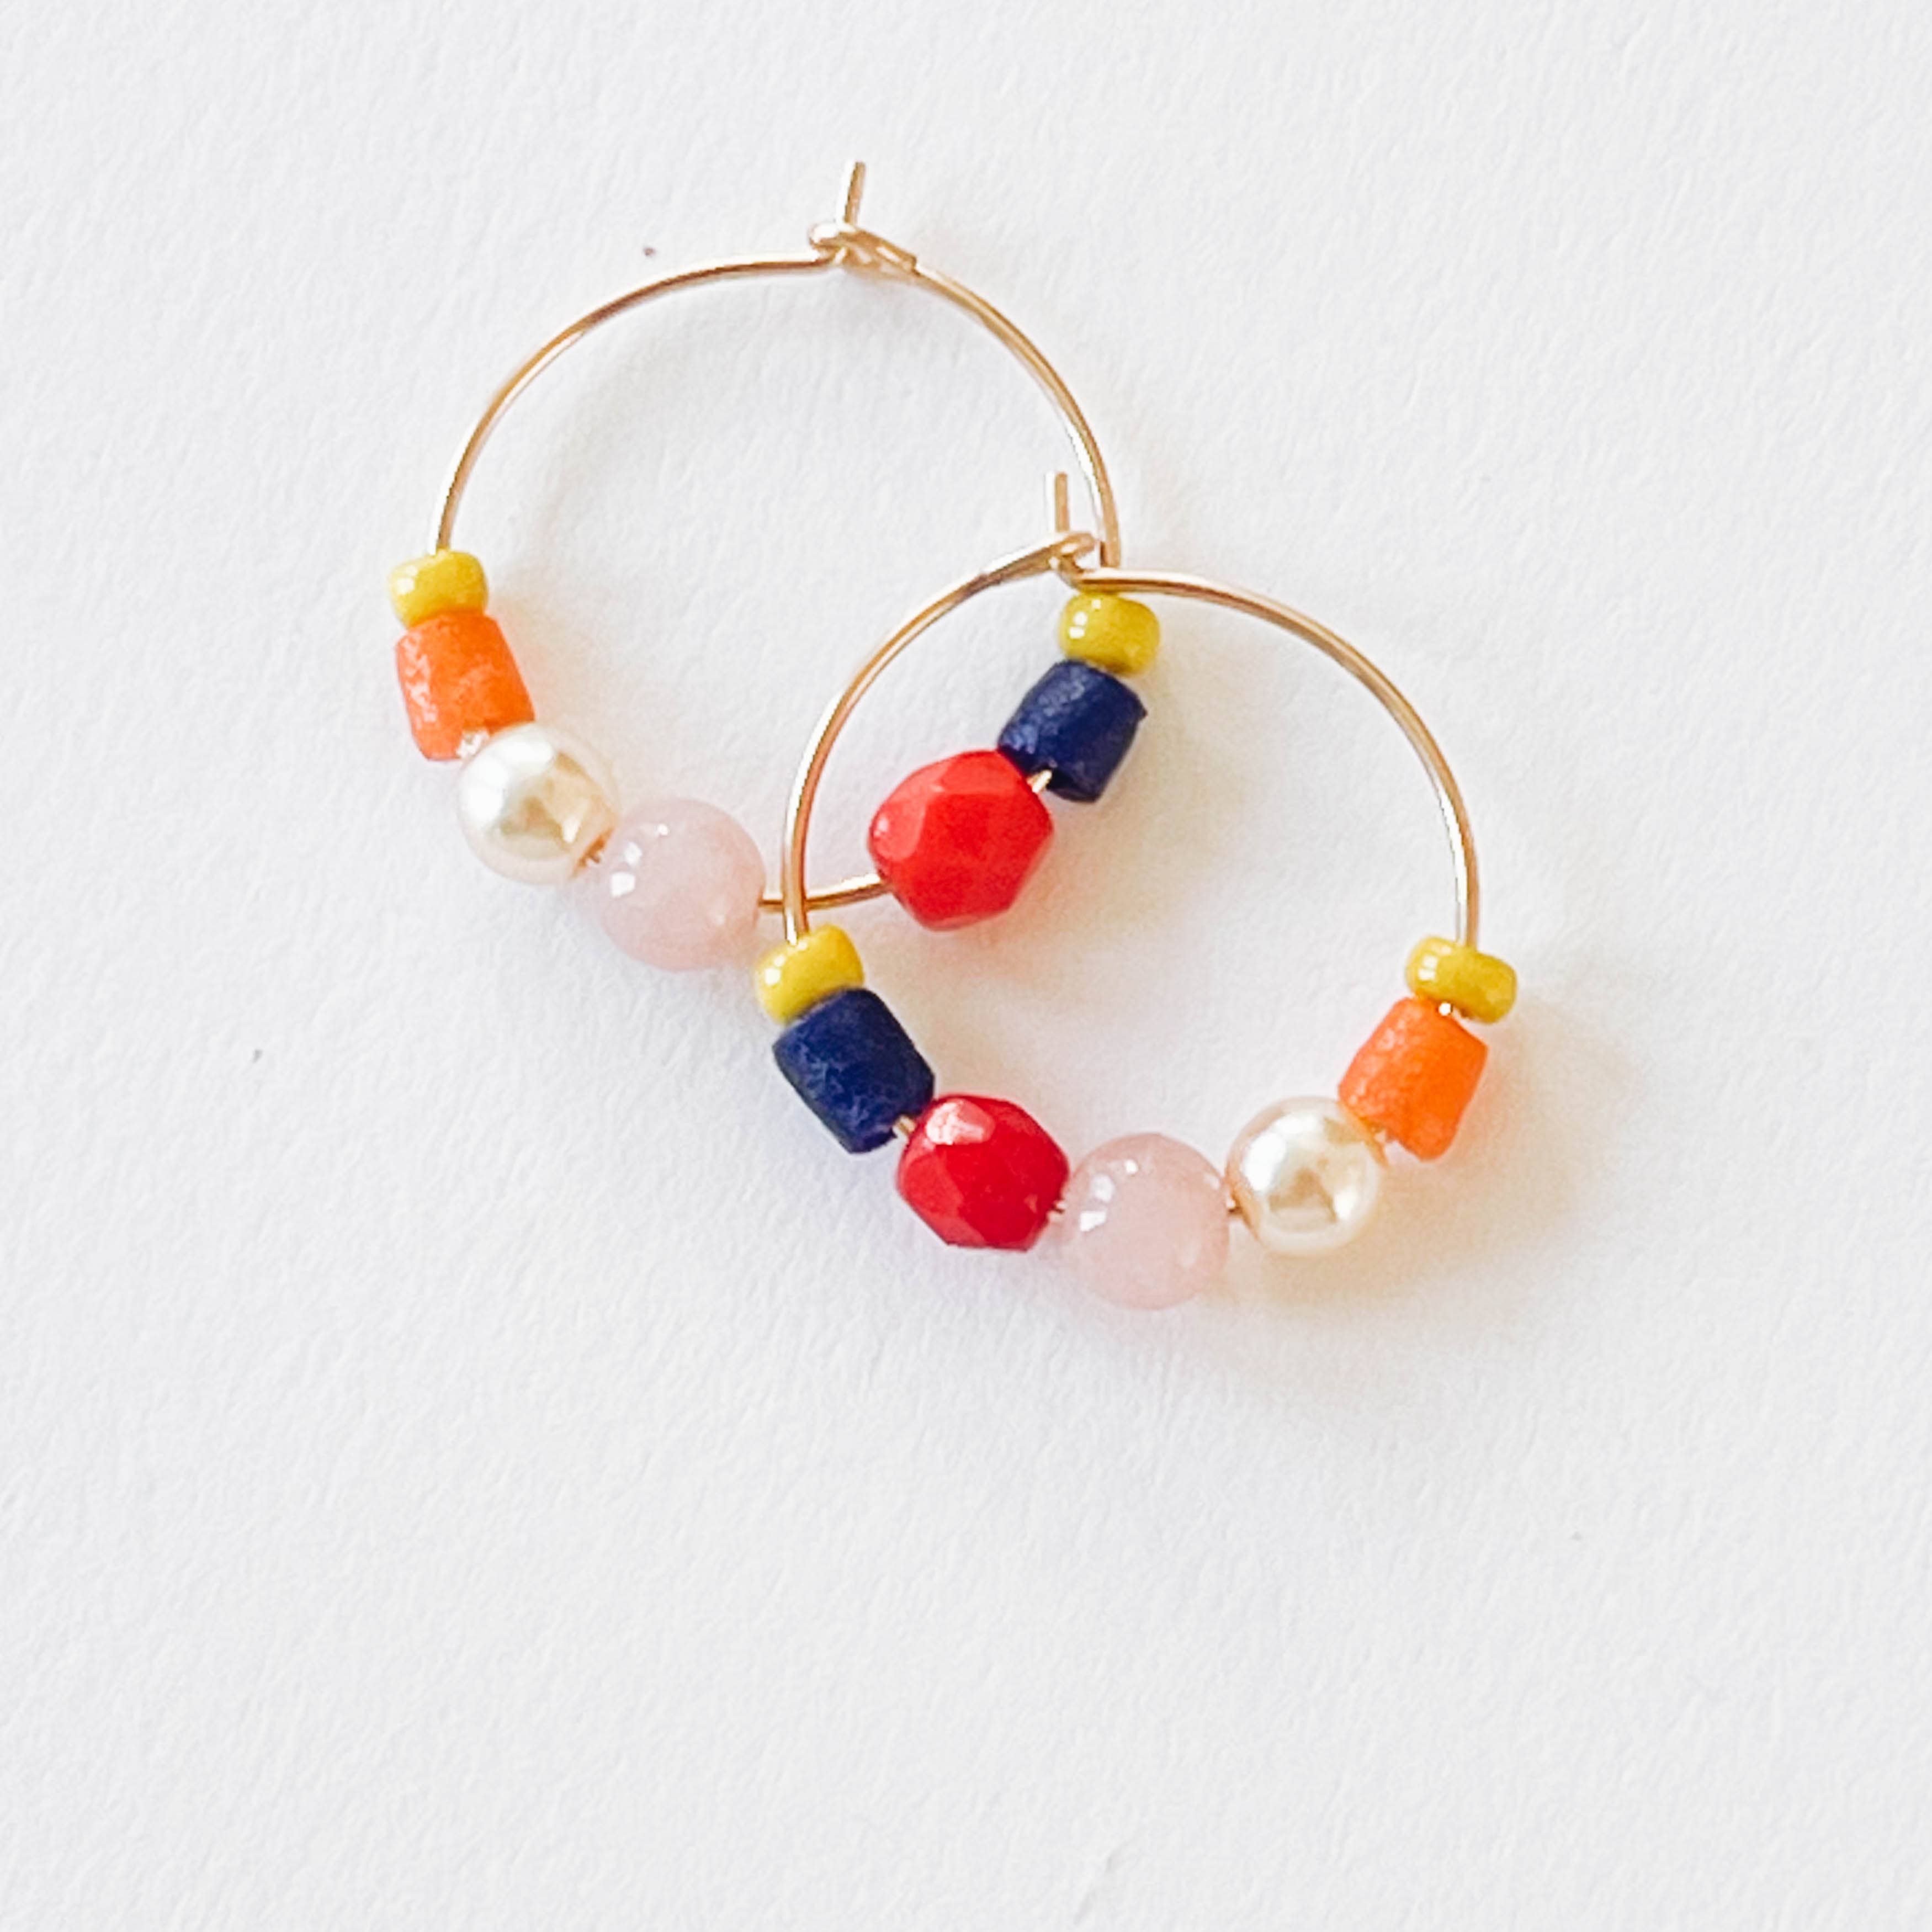 Nest Pretty Things - Small colorful Gold filled hoops